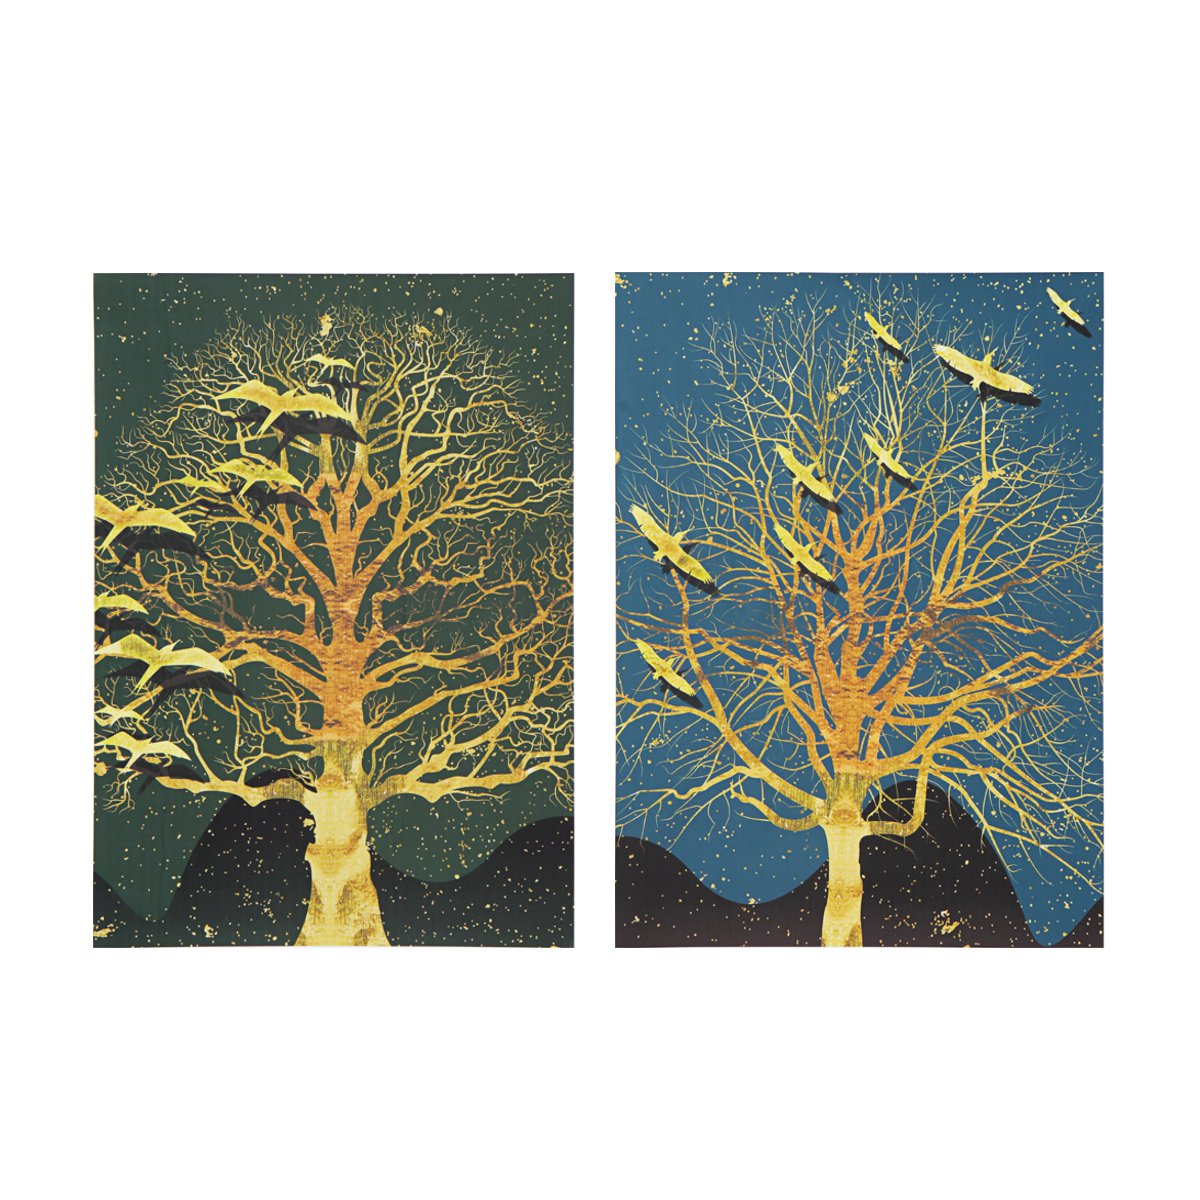 2Pcs-Modern-Tree-Canvas-Print-Paintings-Wall-Art-Unframed-Picture-Home-Decor-1430564